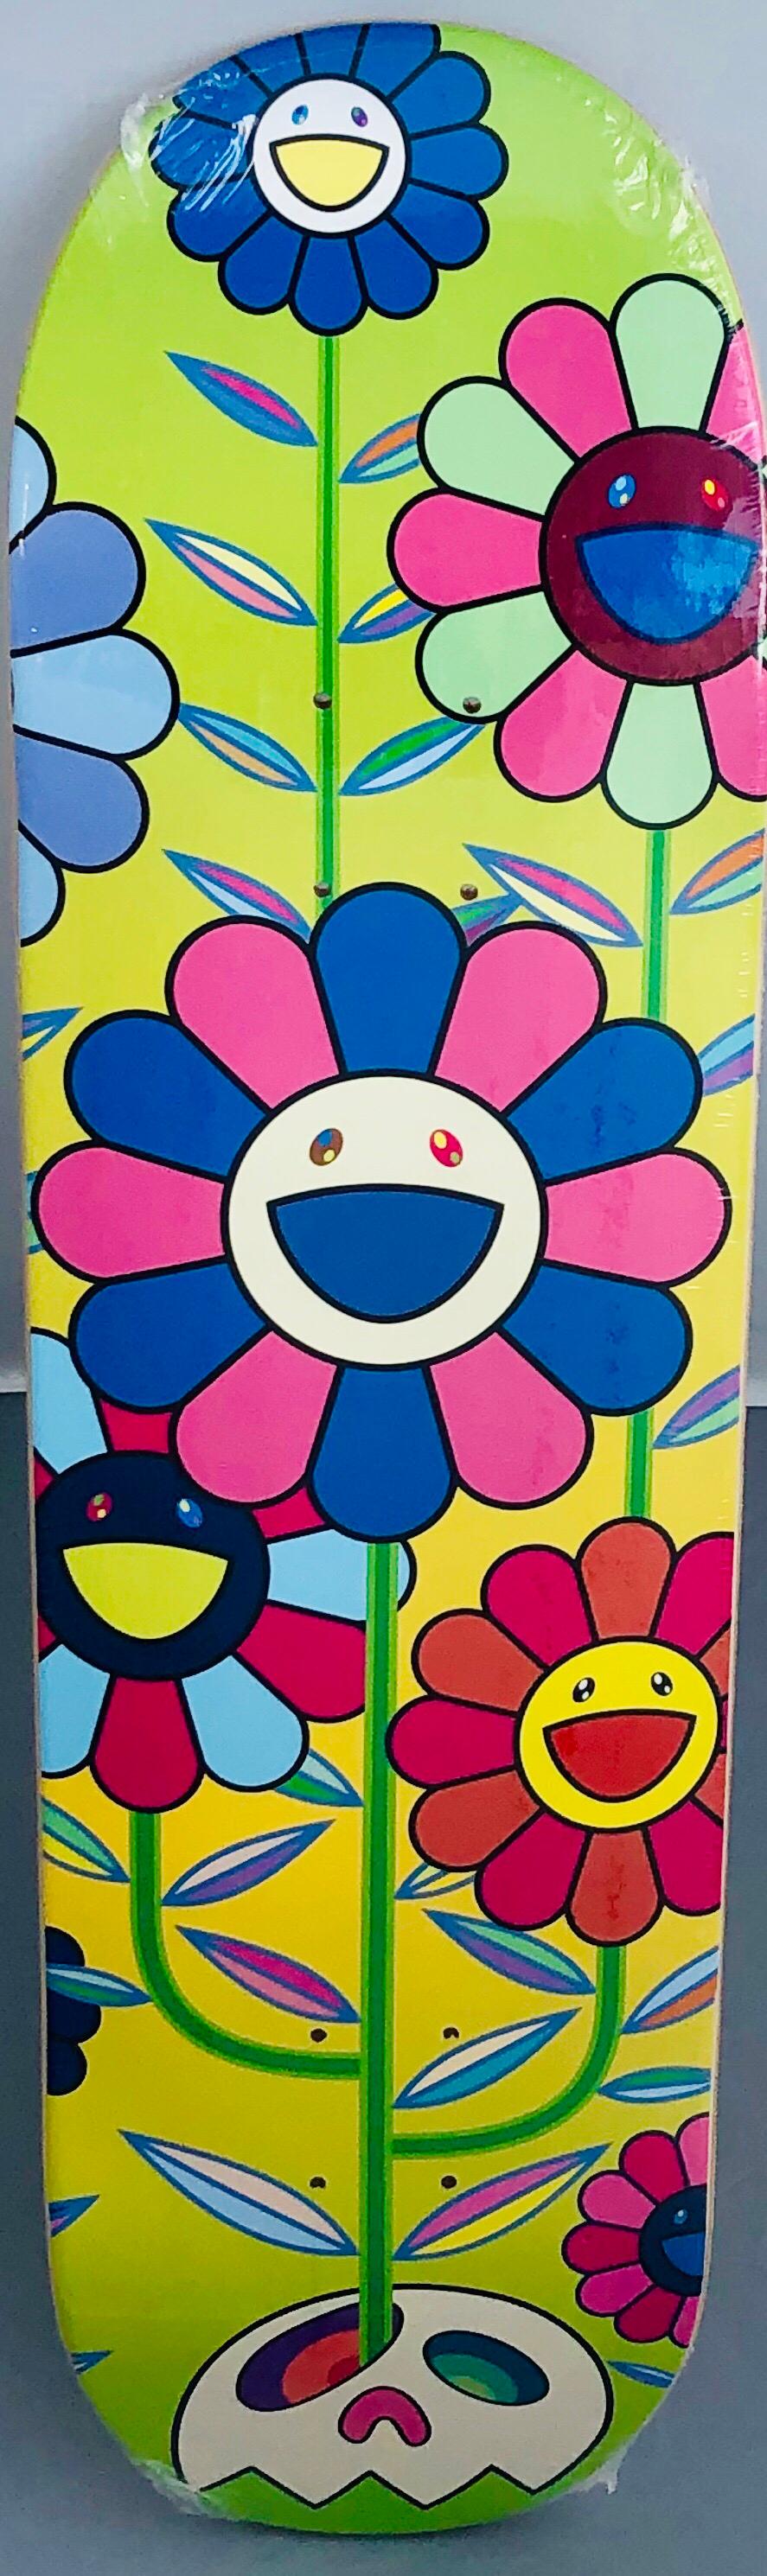 Takashi Murakami Flowers Skate Deck
A vibrant piece of Takashi Murakami wall art produced as a completely sold out, limited series in 2019 in conjunction with Complexcon and Kaikai Kiki co. This deck is new in its original packaging. A brilliant